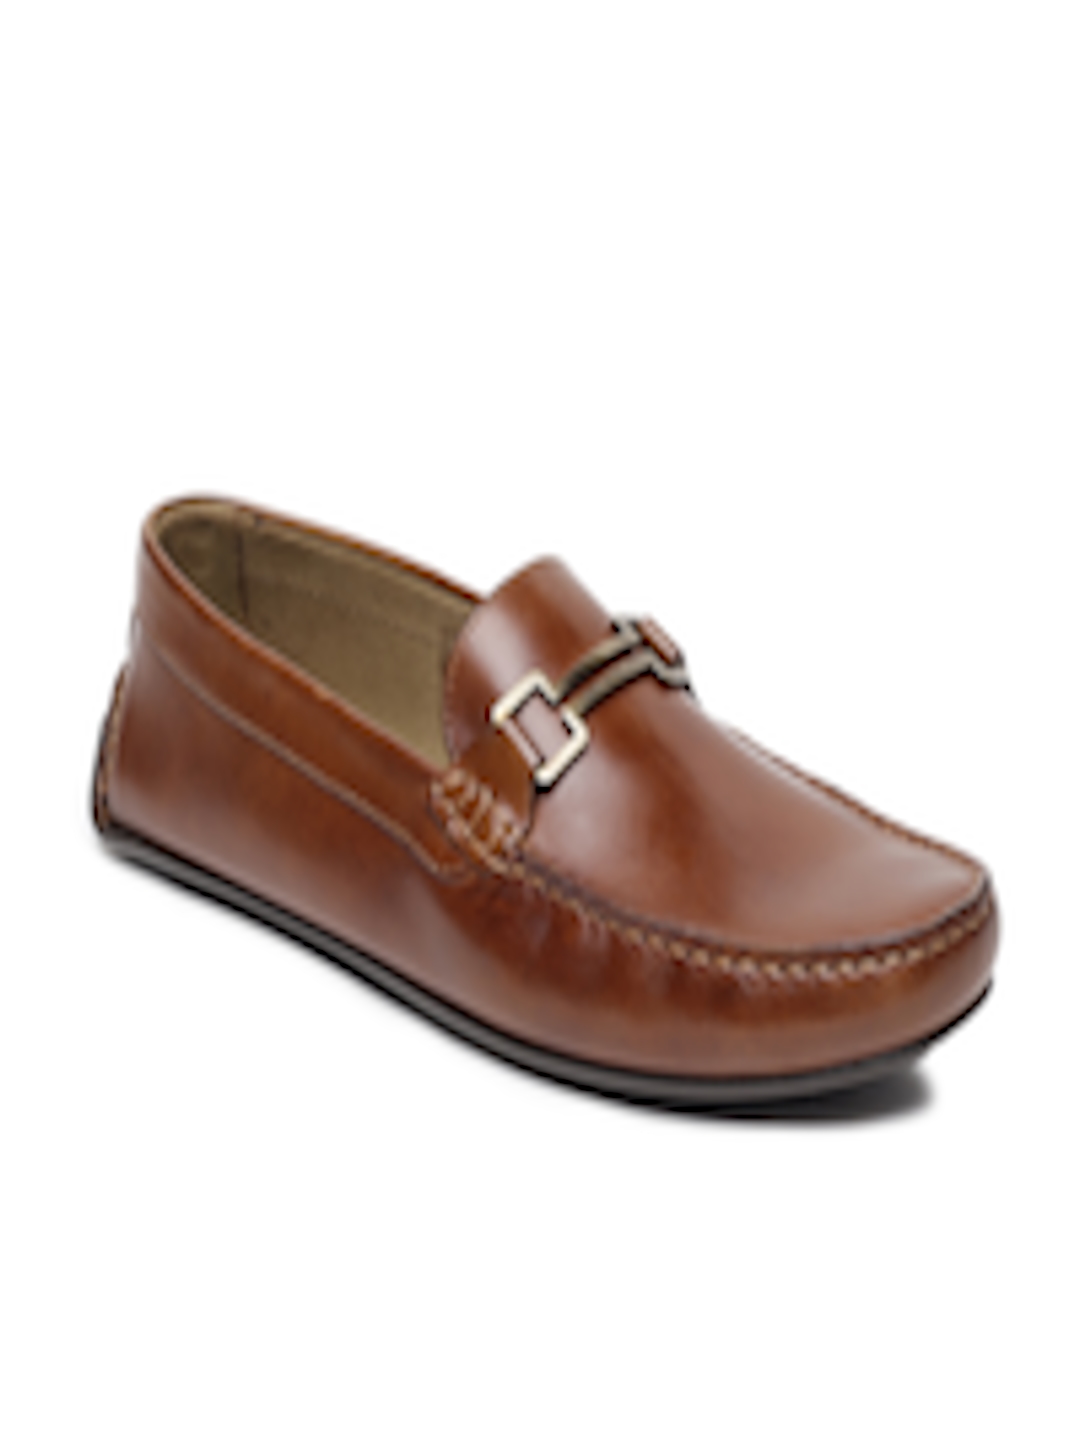 Buy Louis Philippe Men Tan Leather Loafers - Formal Shoes for Men 7704883 | Myntra